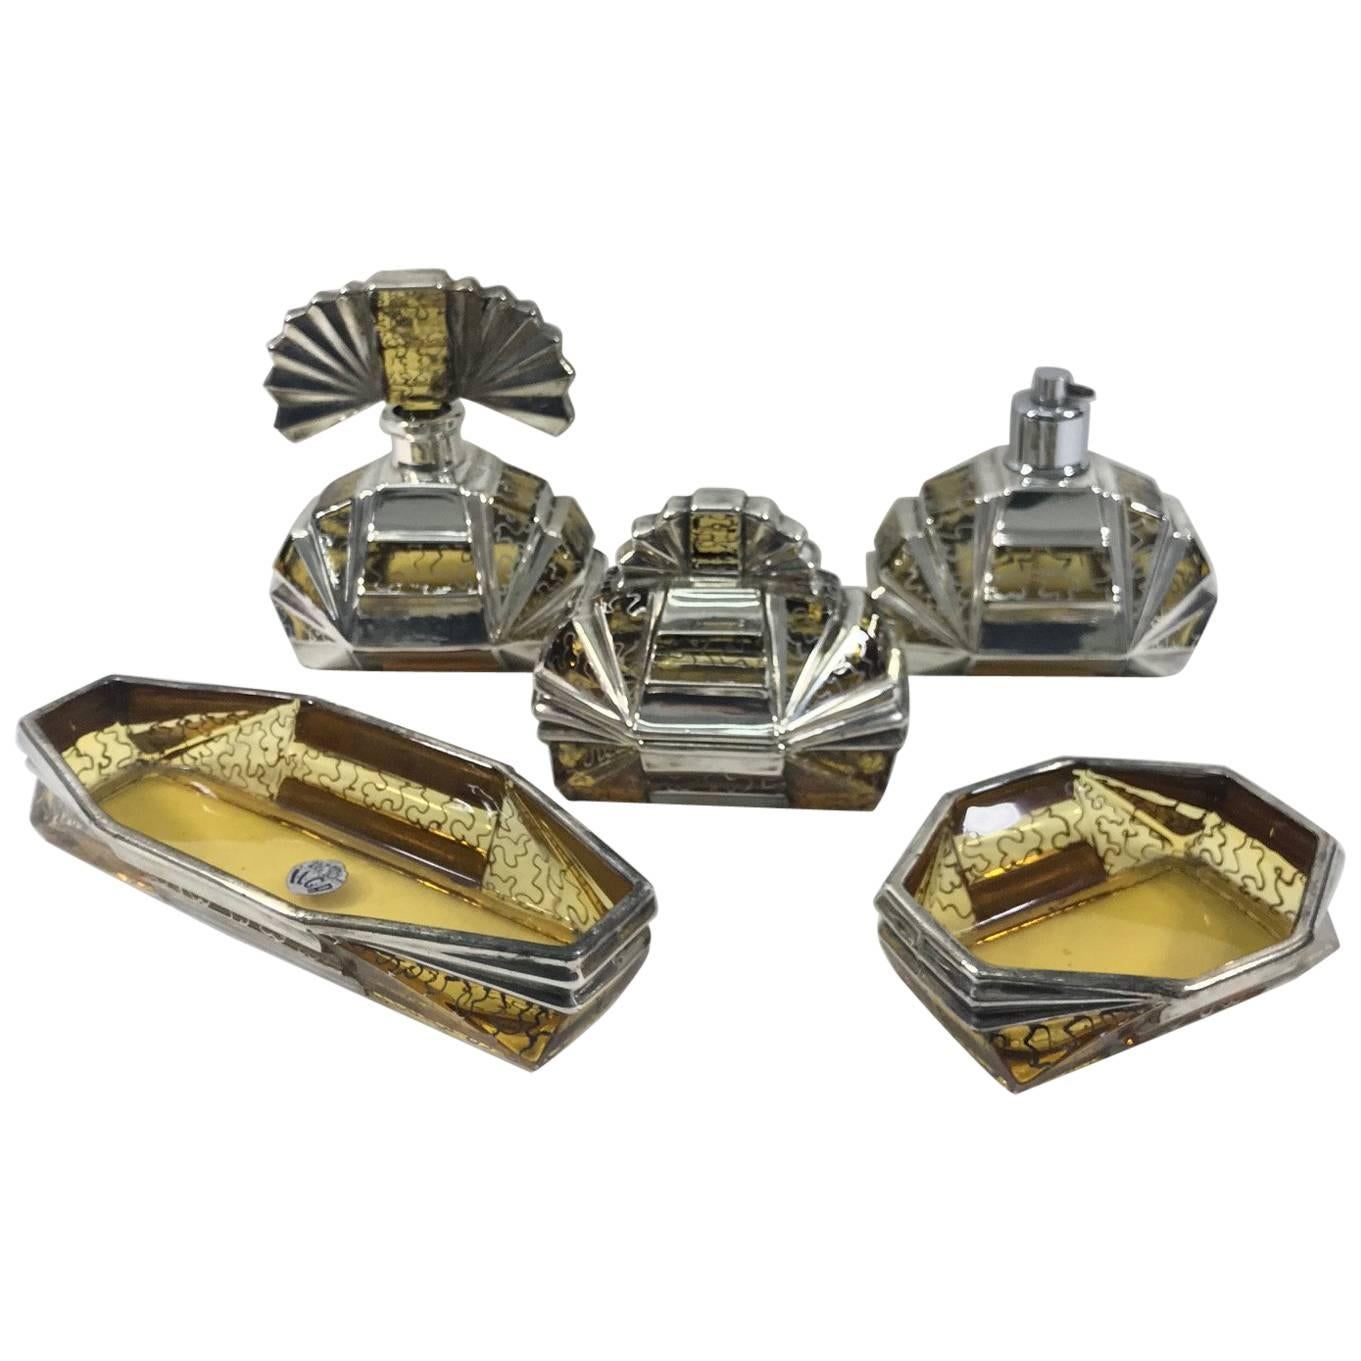 Italian Art Deco Glass and Sterling Toilet Set by Ilga